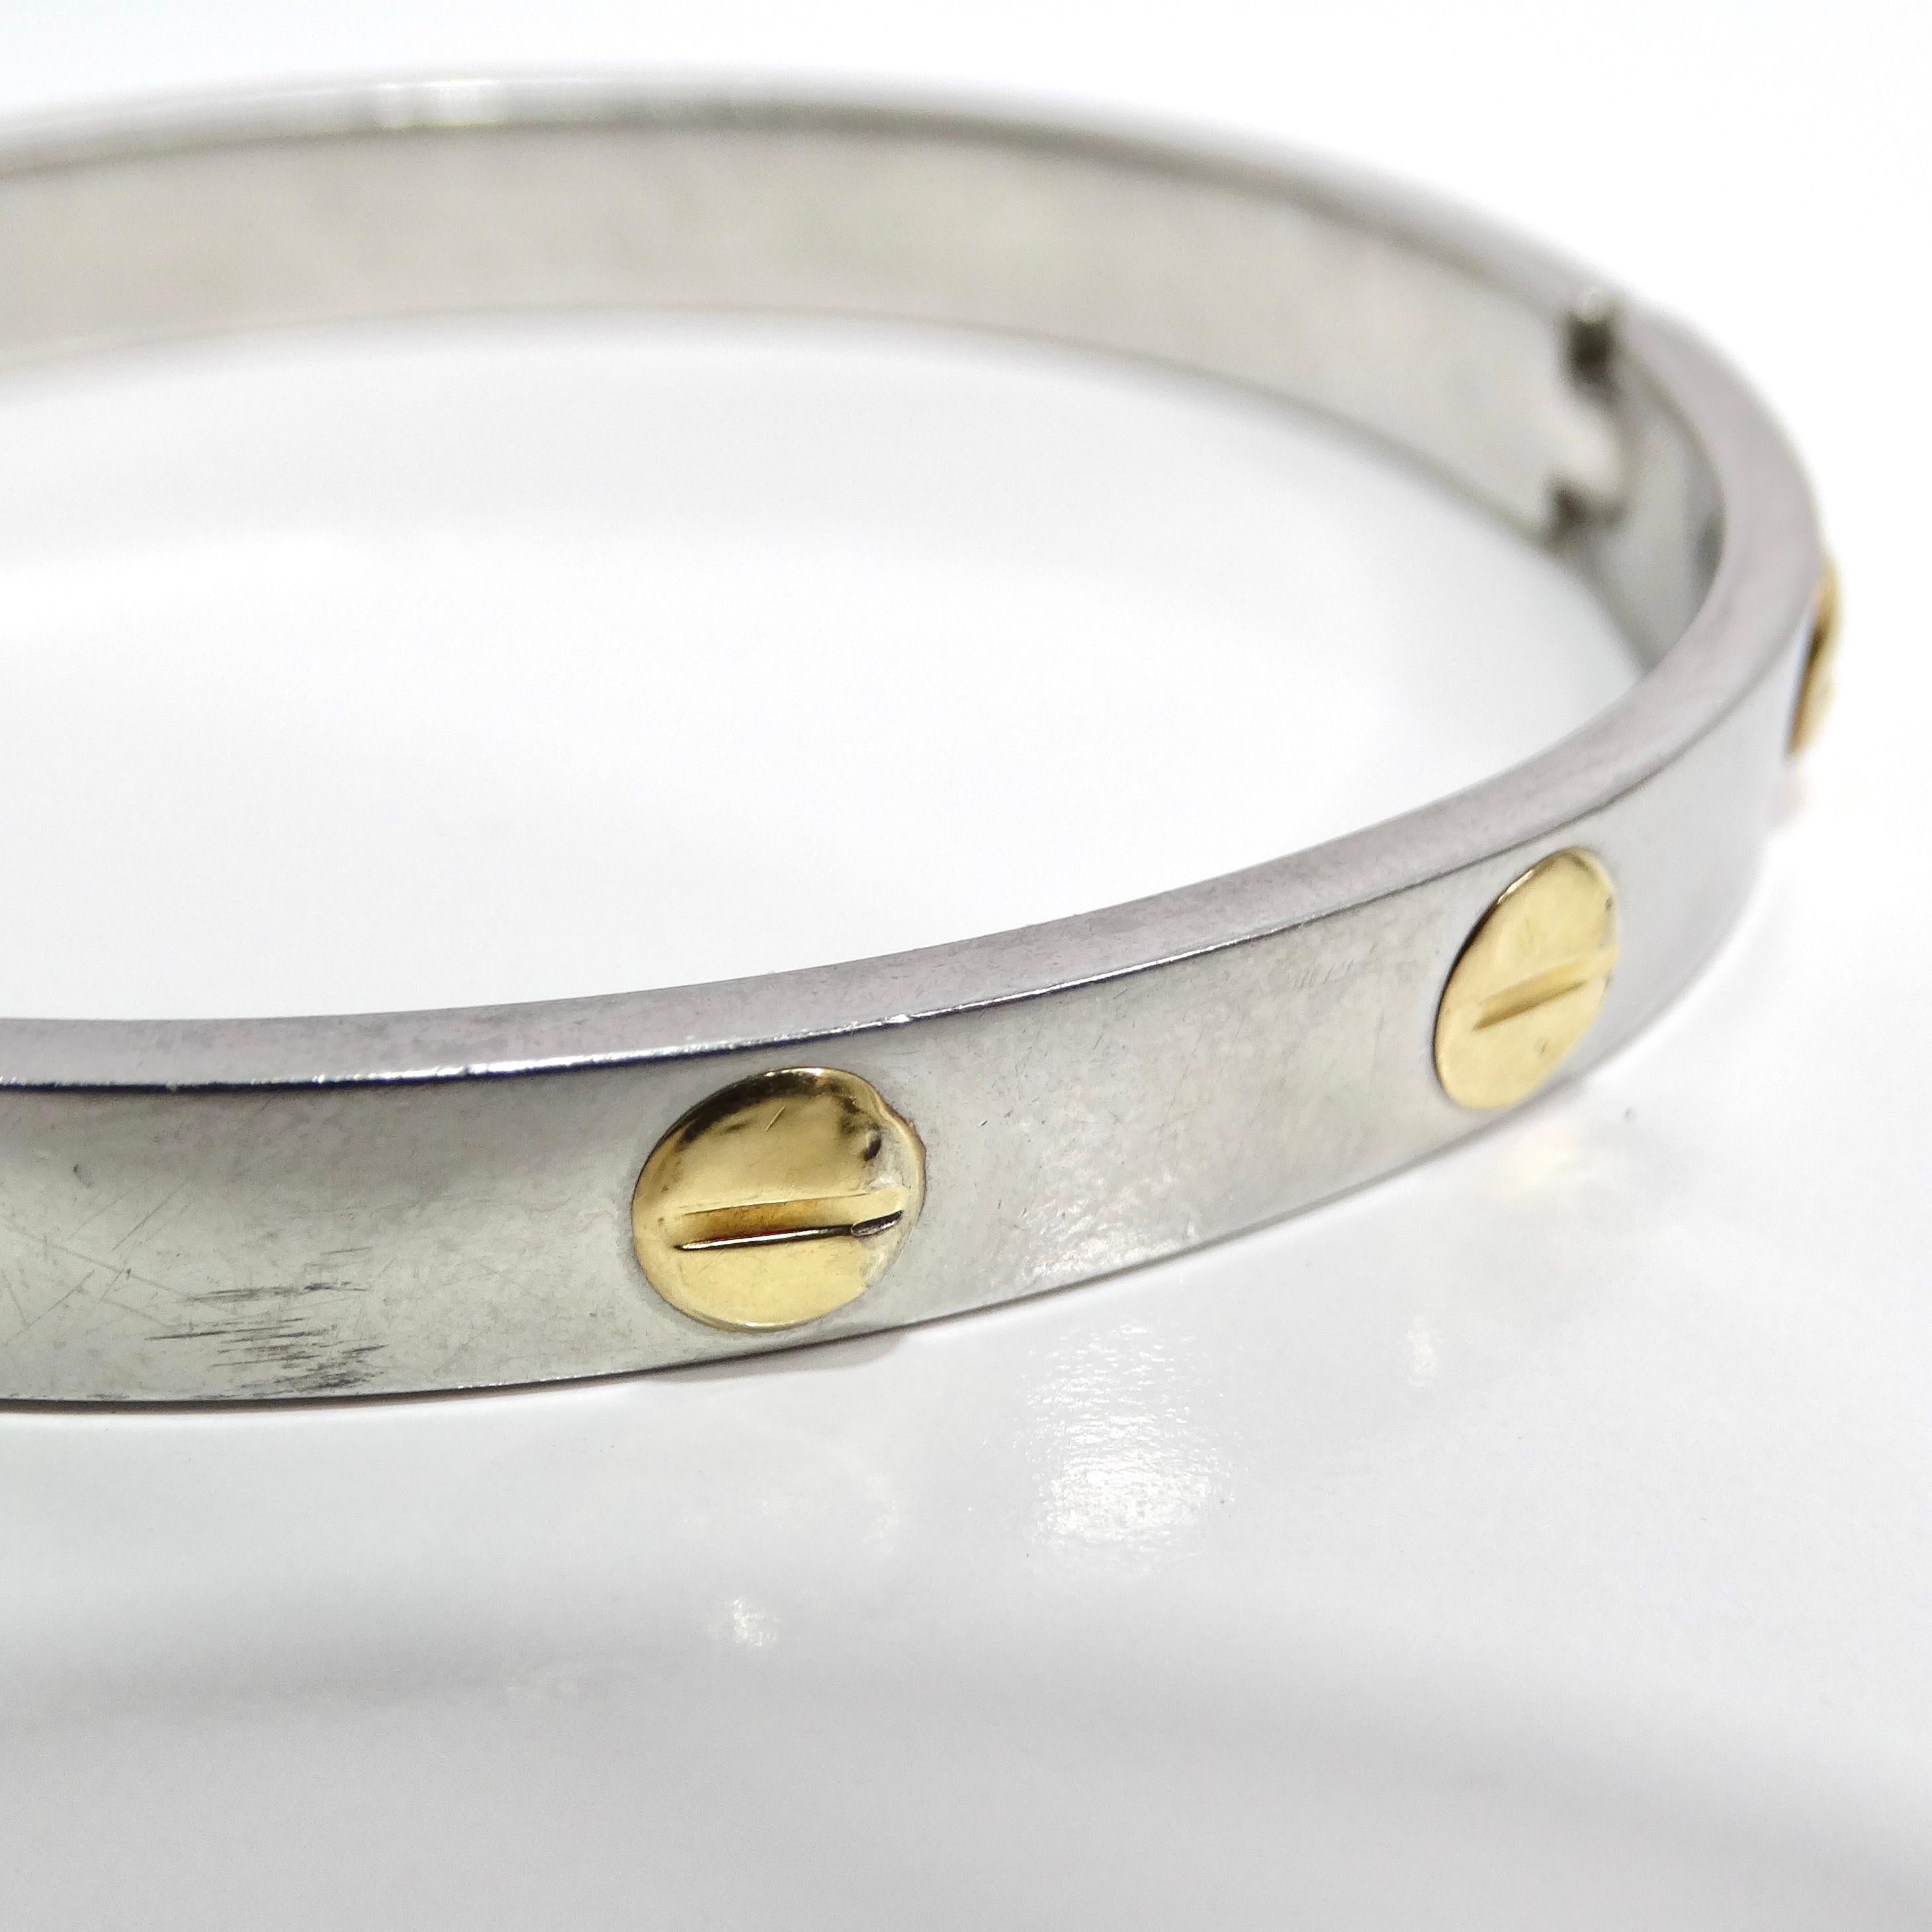 gold bangle cartier inspired